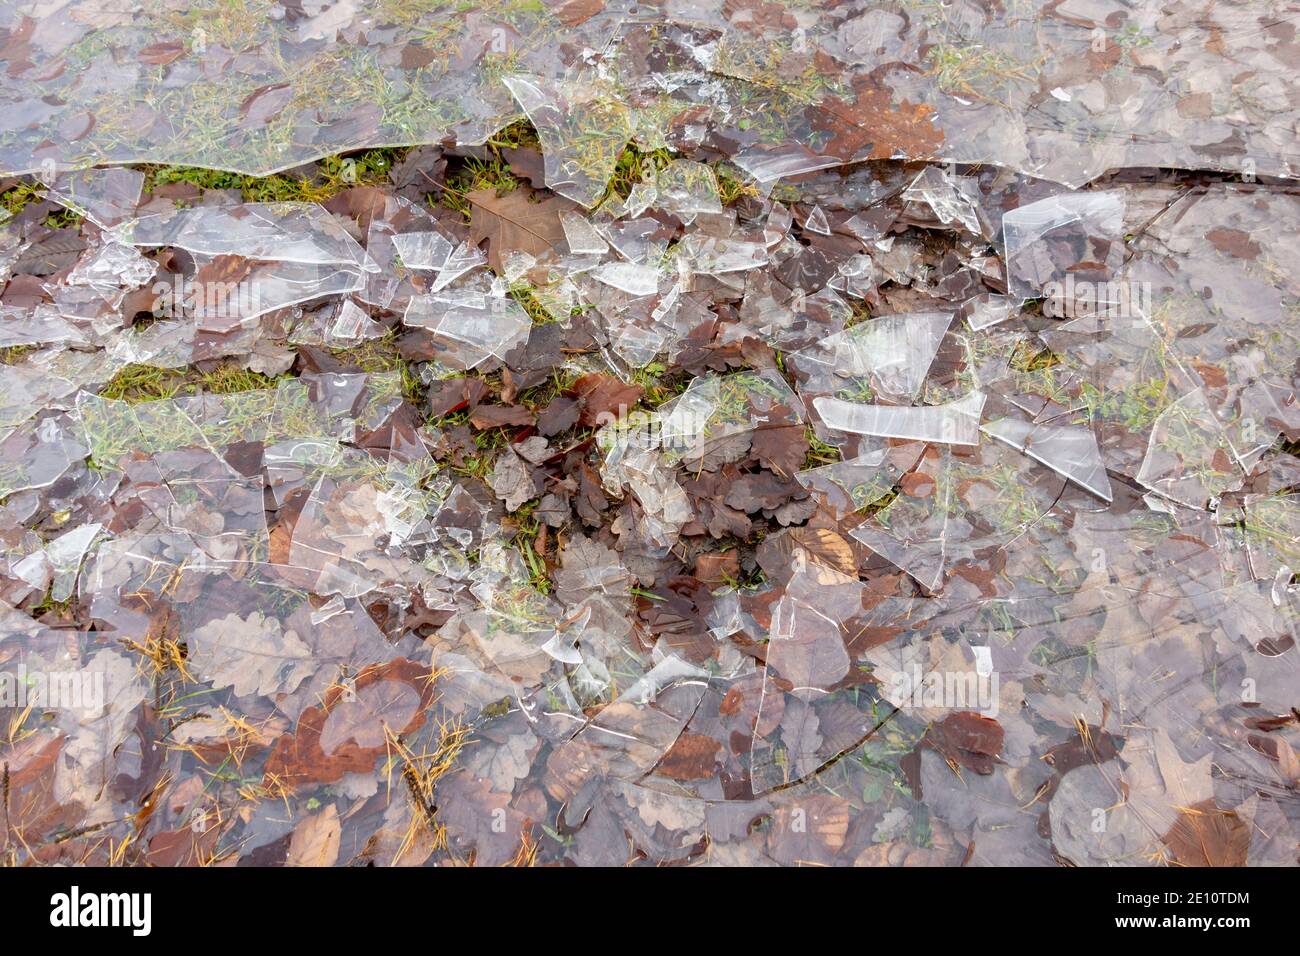 fragmented ice on natural ground seen from above Stock Photo